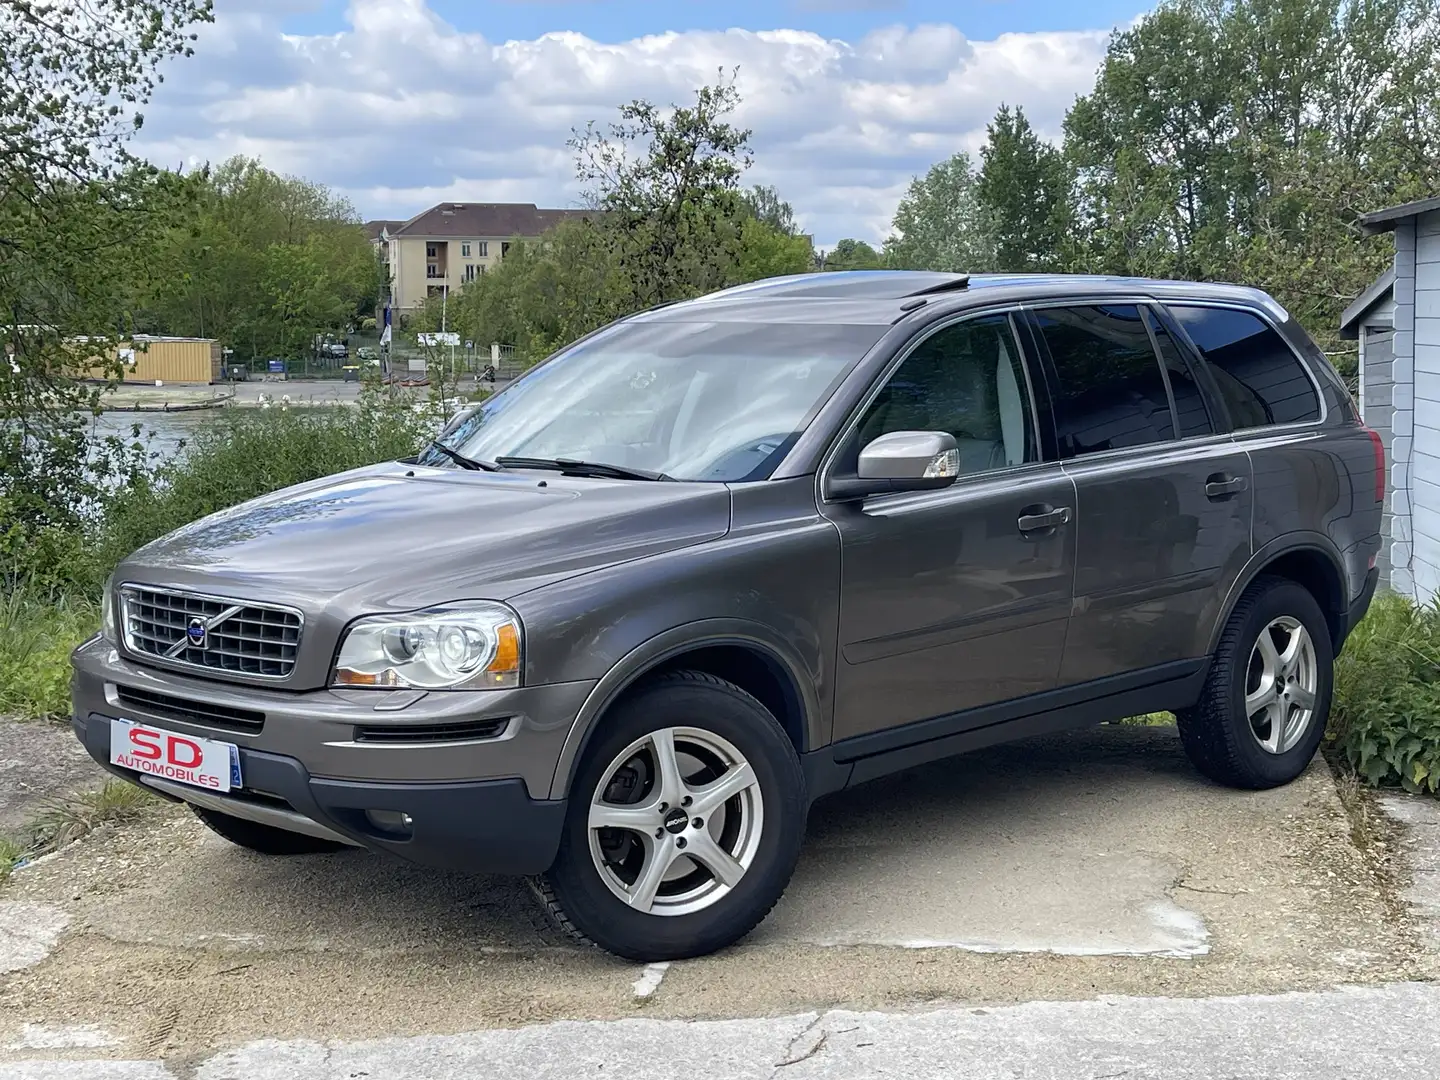 Volvo XC90 D5 185ch FAP Xenium Geartronic 7 places Barna - 1